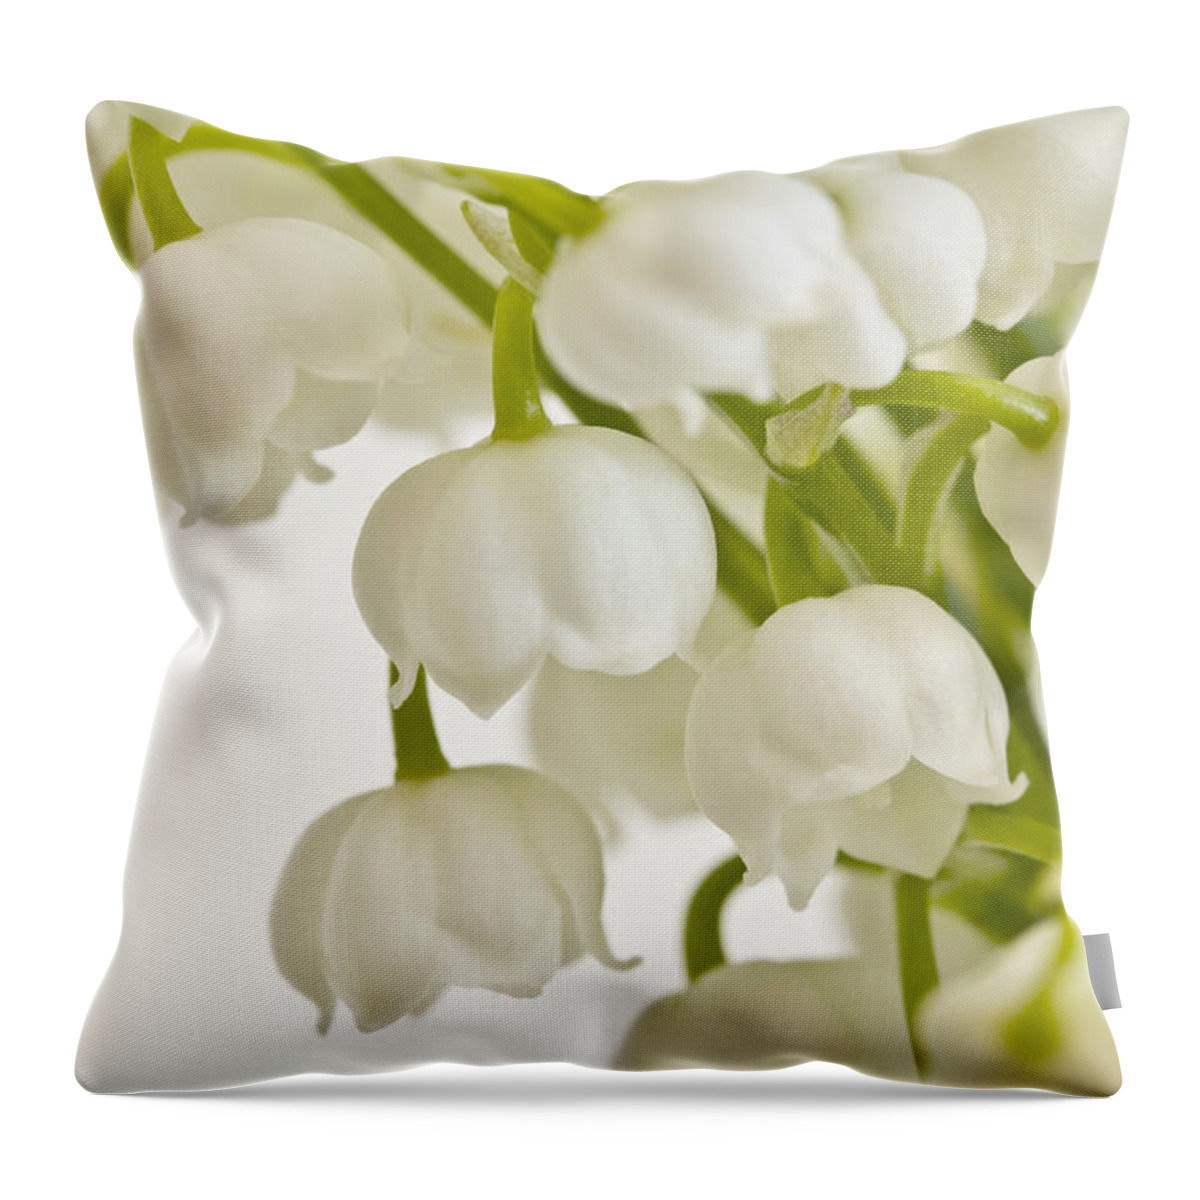 Lily Of The Valley Throw Pillow featuring the photograph Lily Of The Valley by Sandra Foster